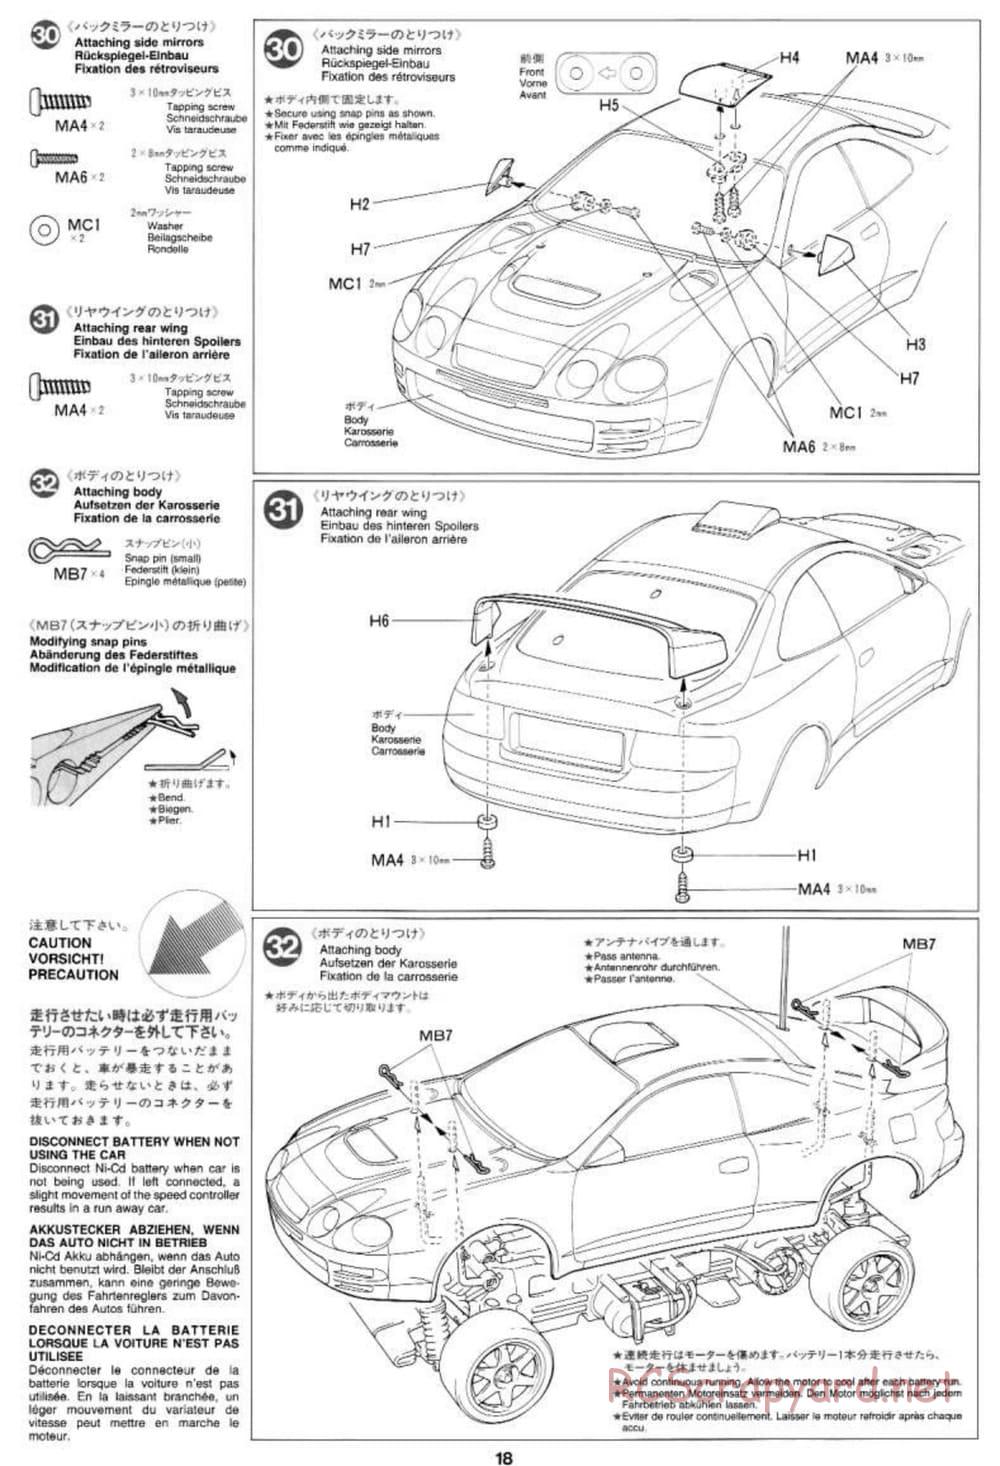 Tamiya - Toyota Celica GT-Four 97 Monte Carlo - TL-01 Chassis - Manual - Page 18